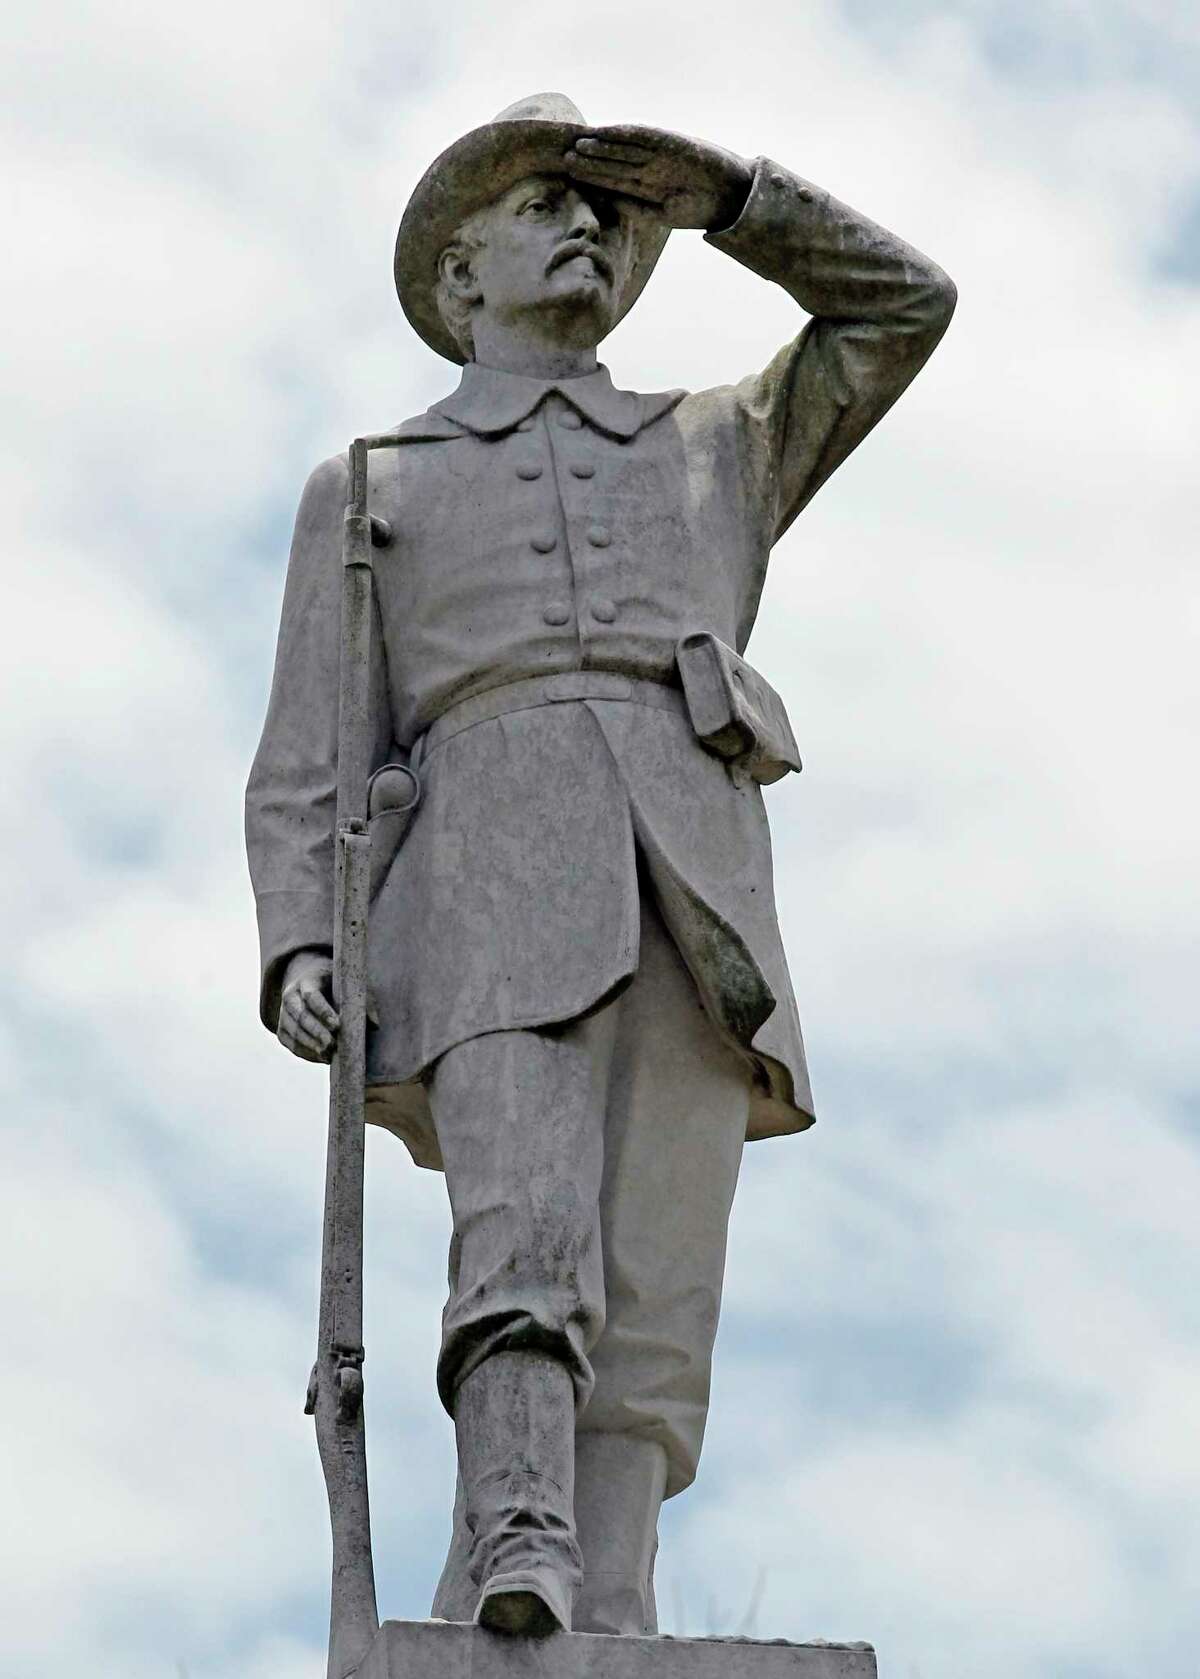 The statue of a rebel soldier has looked steadfastly northward from his sentry post atop a tall pedestal in a Gonzales park since 1909. Some now want it removed.